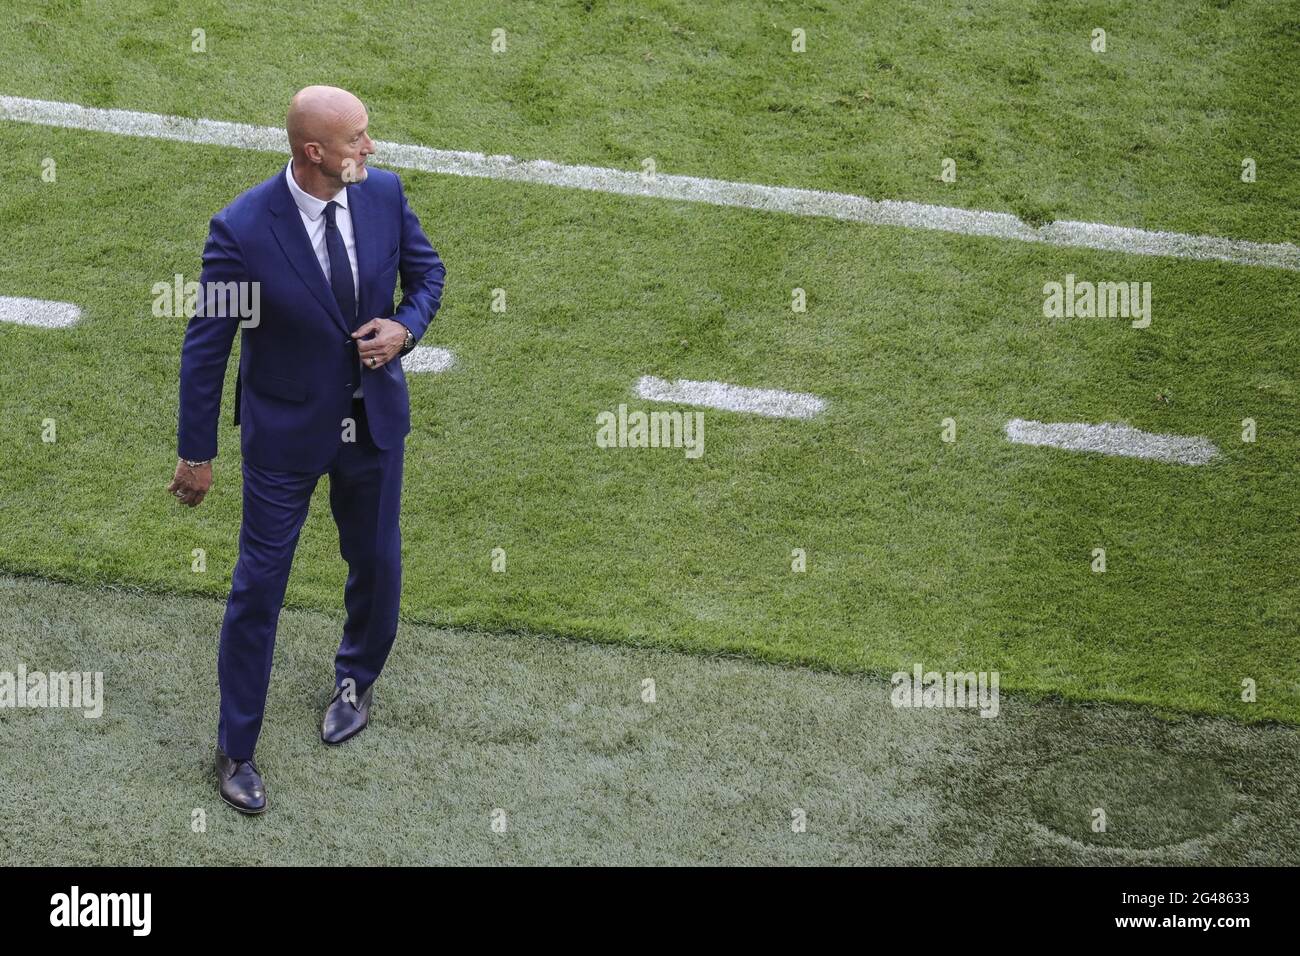 Budapest, Hungary. 19th June, 2021. Manager of Hungary, Marco Rossi, during the EURO 2020 Group F football match between Hungary and France in the Ferenc Puskas Stadium in Budapest Hungary Credit: SPP Sport Press Photo. /Alamy Live News Stock Photo